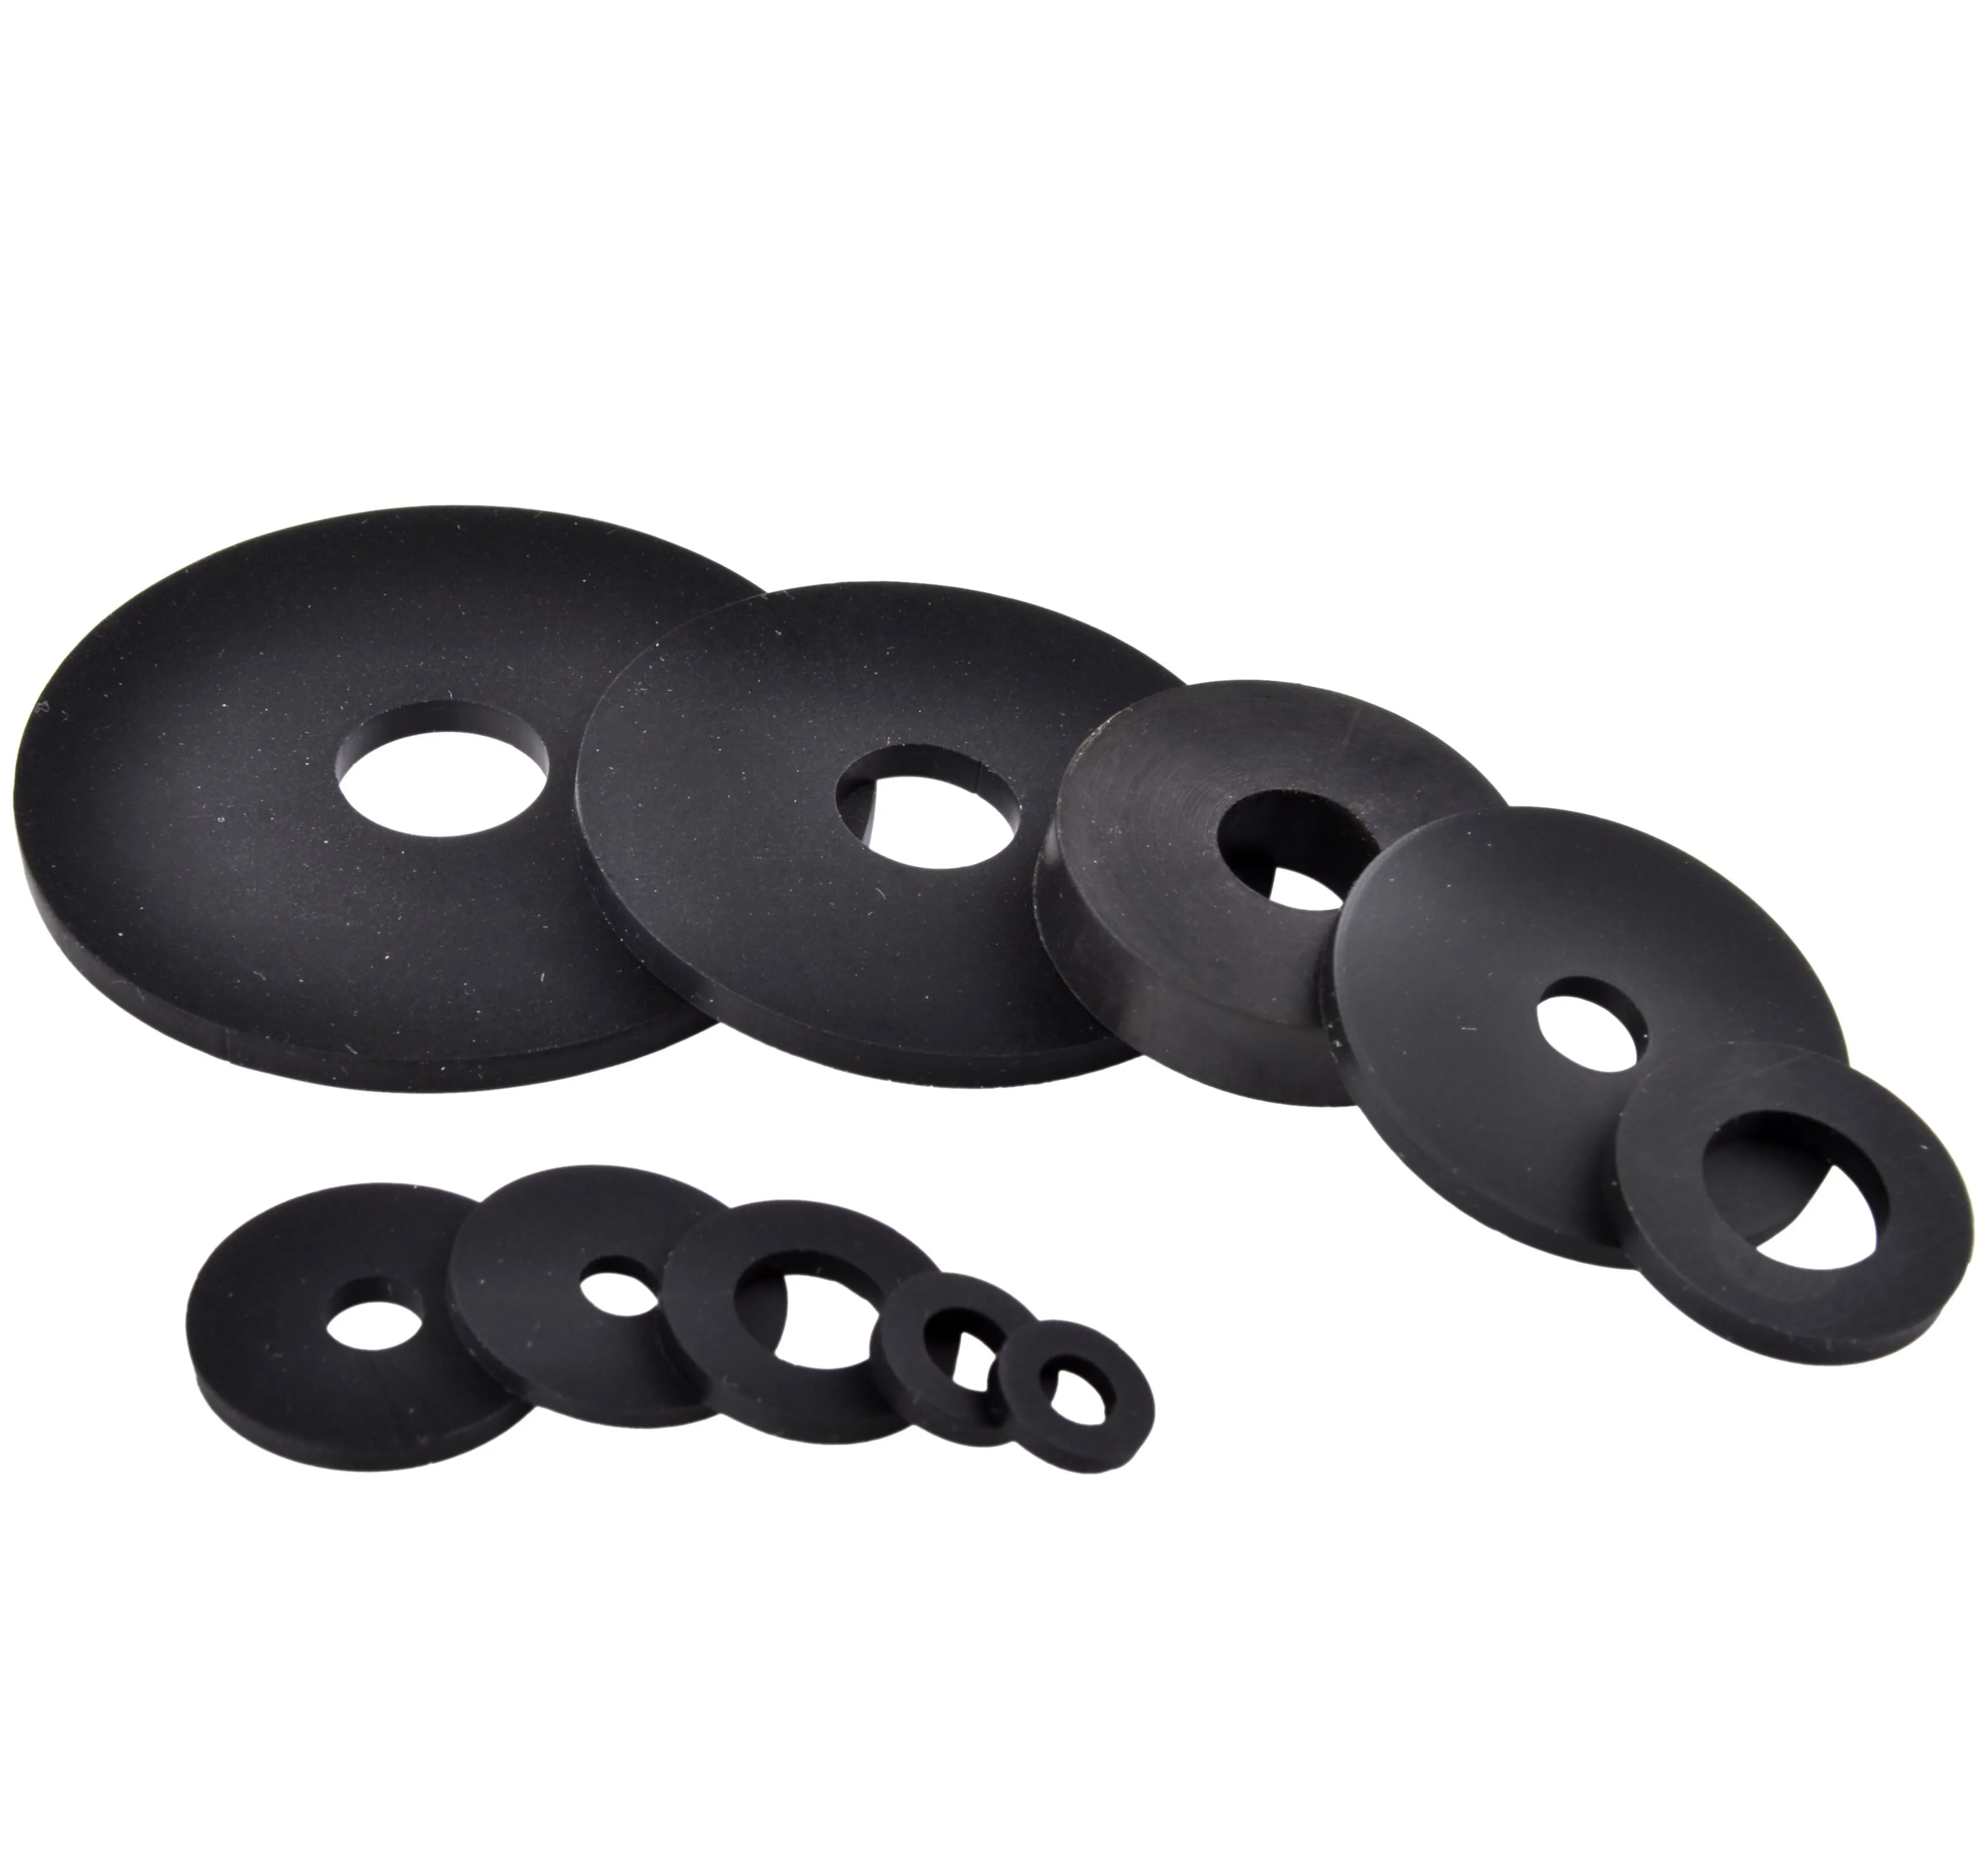 
Rubber Sealing Gasket with High Quality CN;FUJ Customize Size PE ISO Certificate Flat Silicone Bag Carton BS  (62130264230)